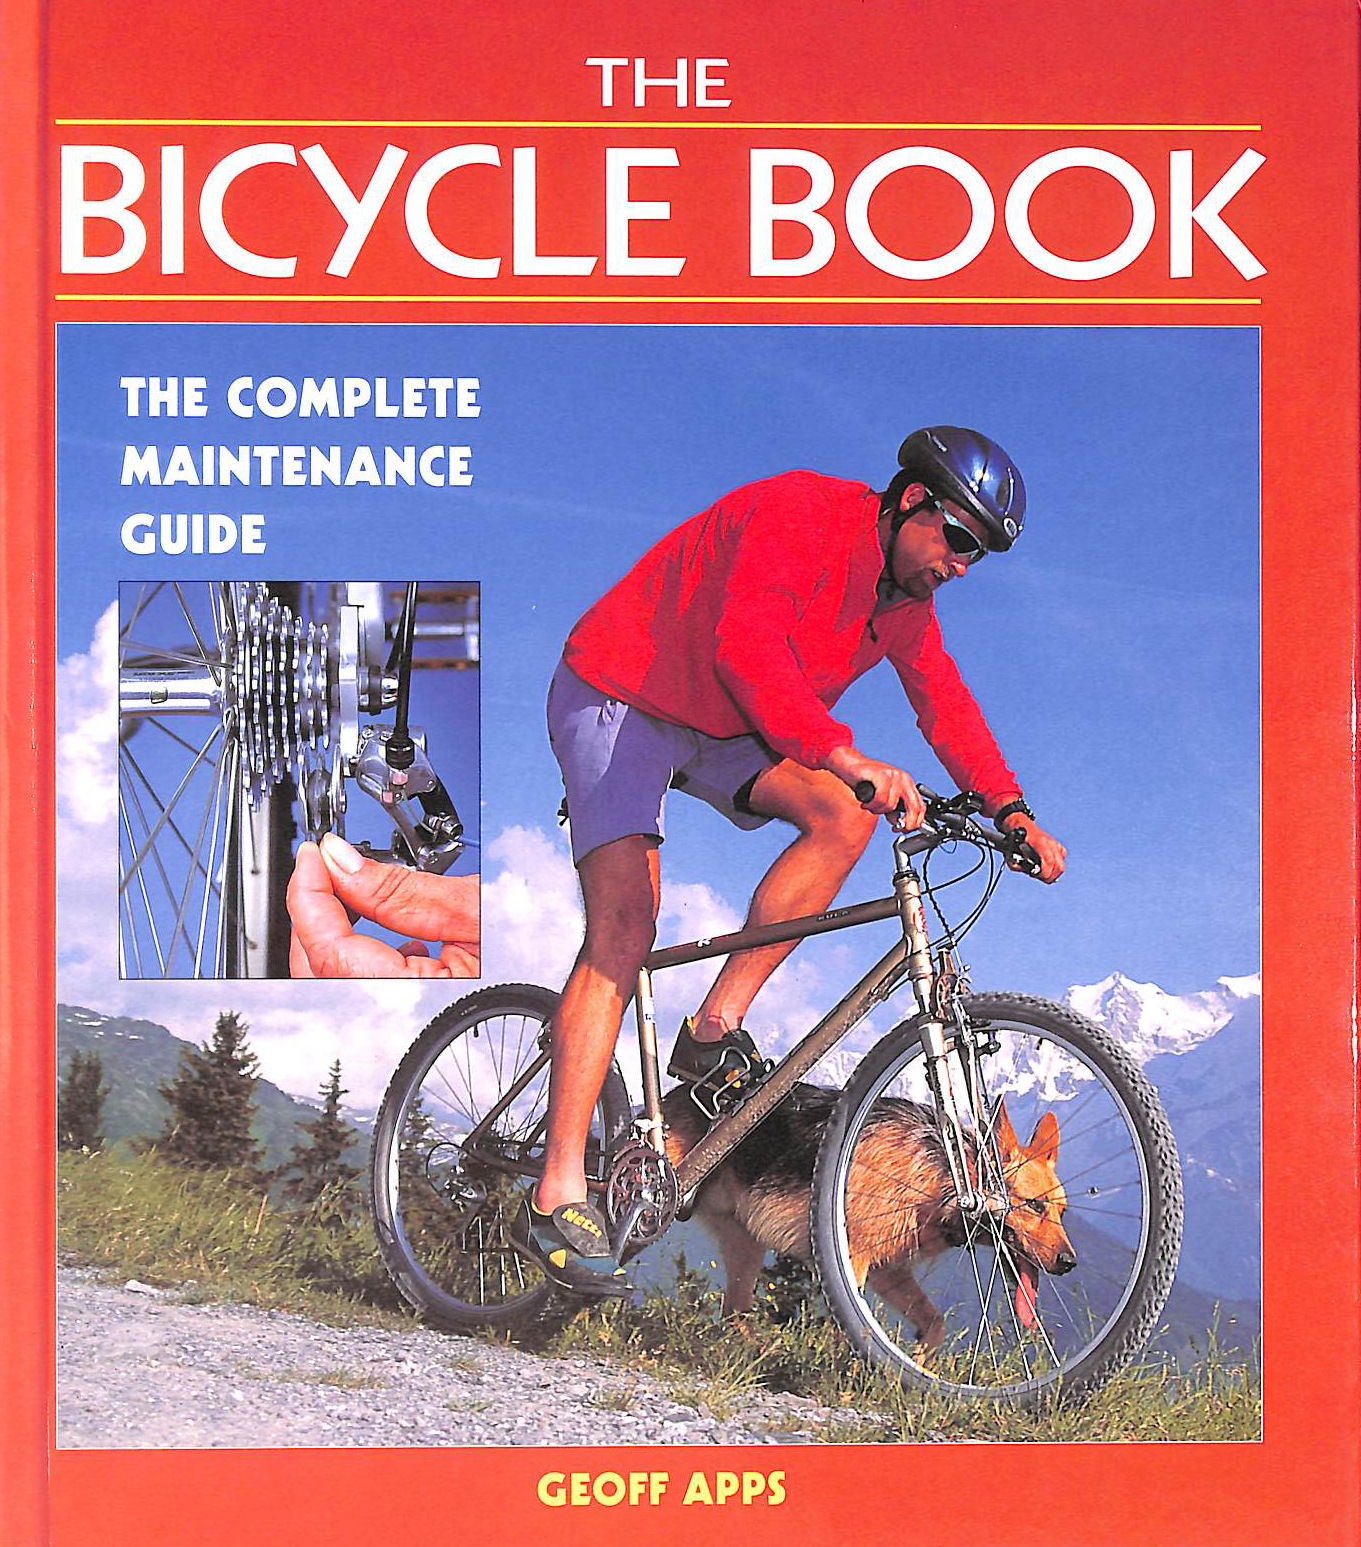 APPS, GEOFF - BICYCLE BOOK